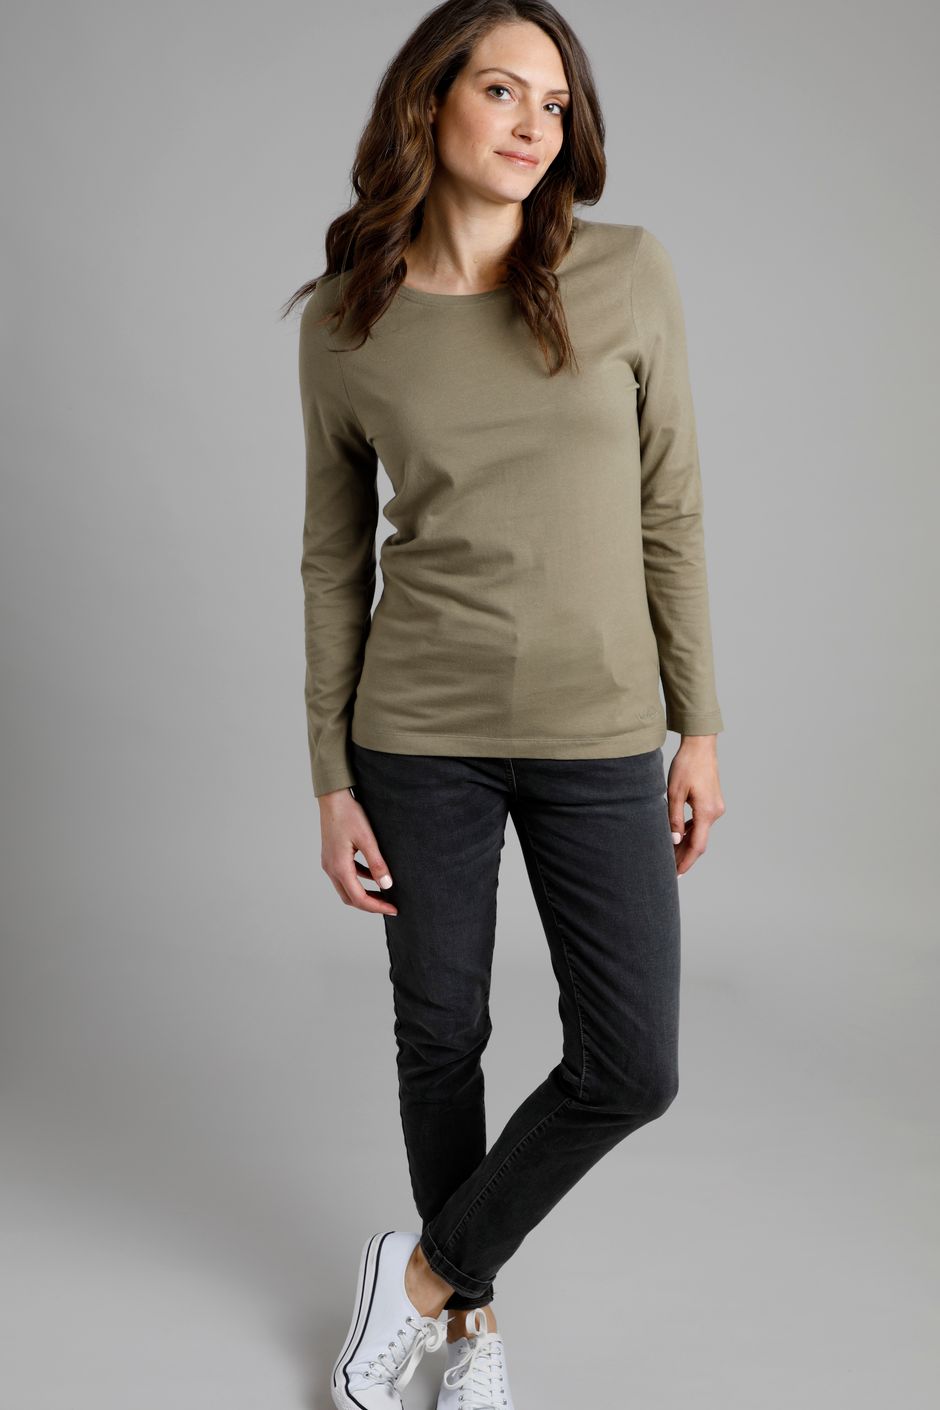 Clermont Outfitter Long Sleeve T-Shirt Olive Green